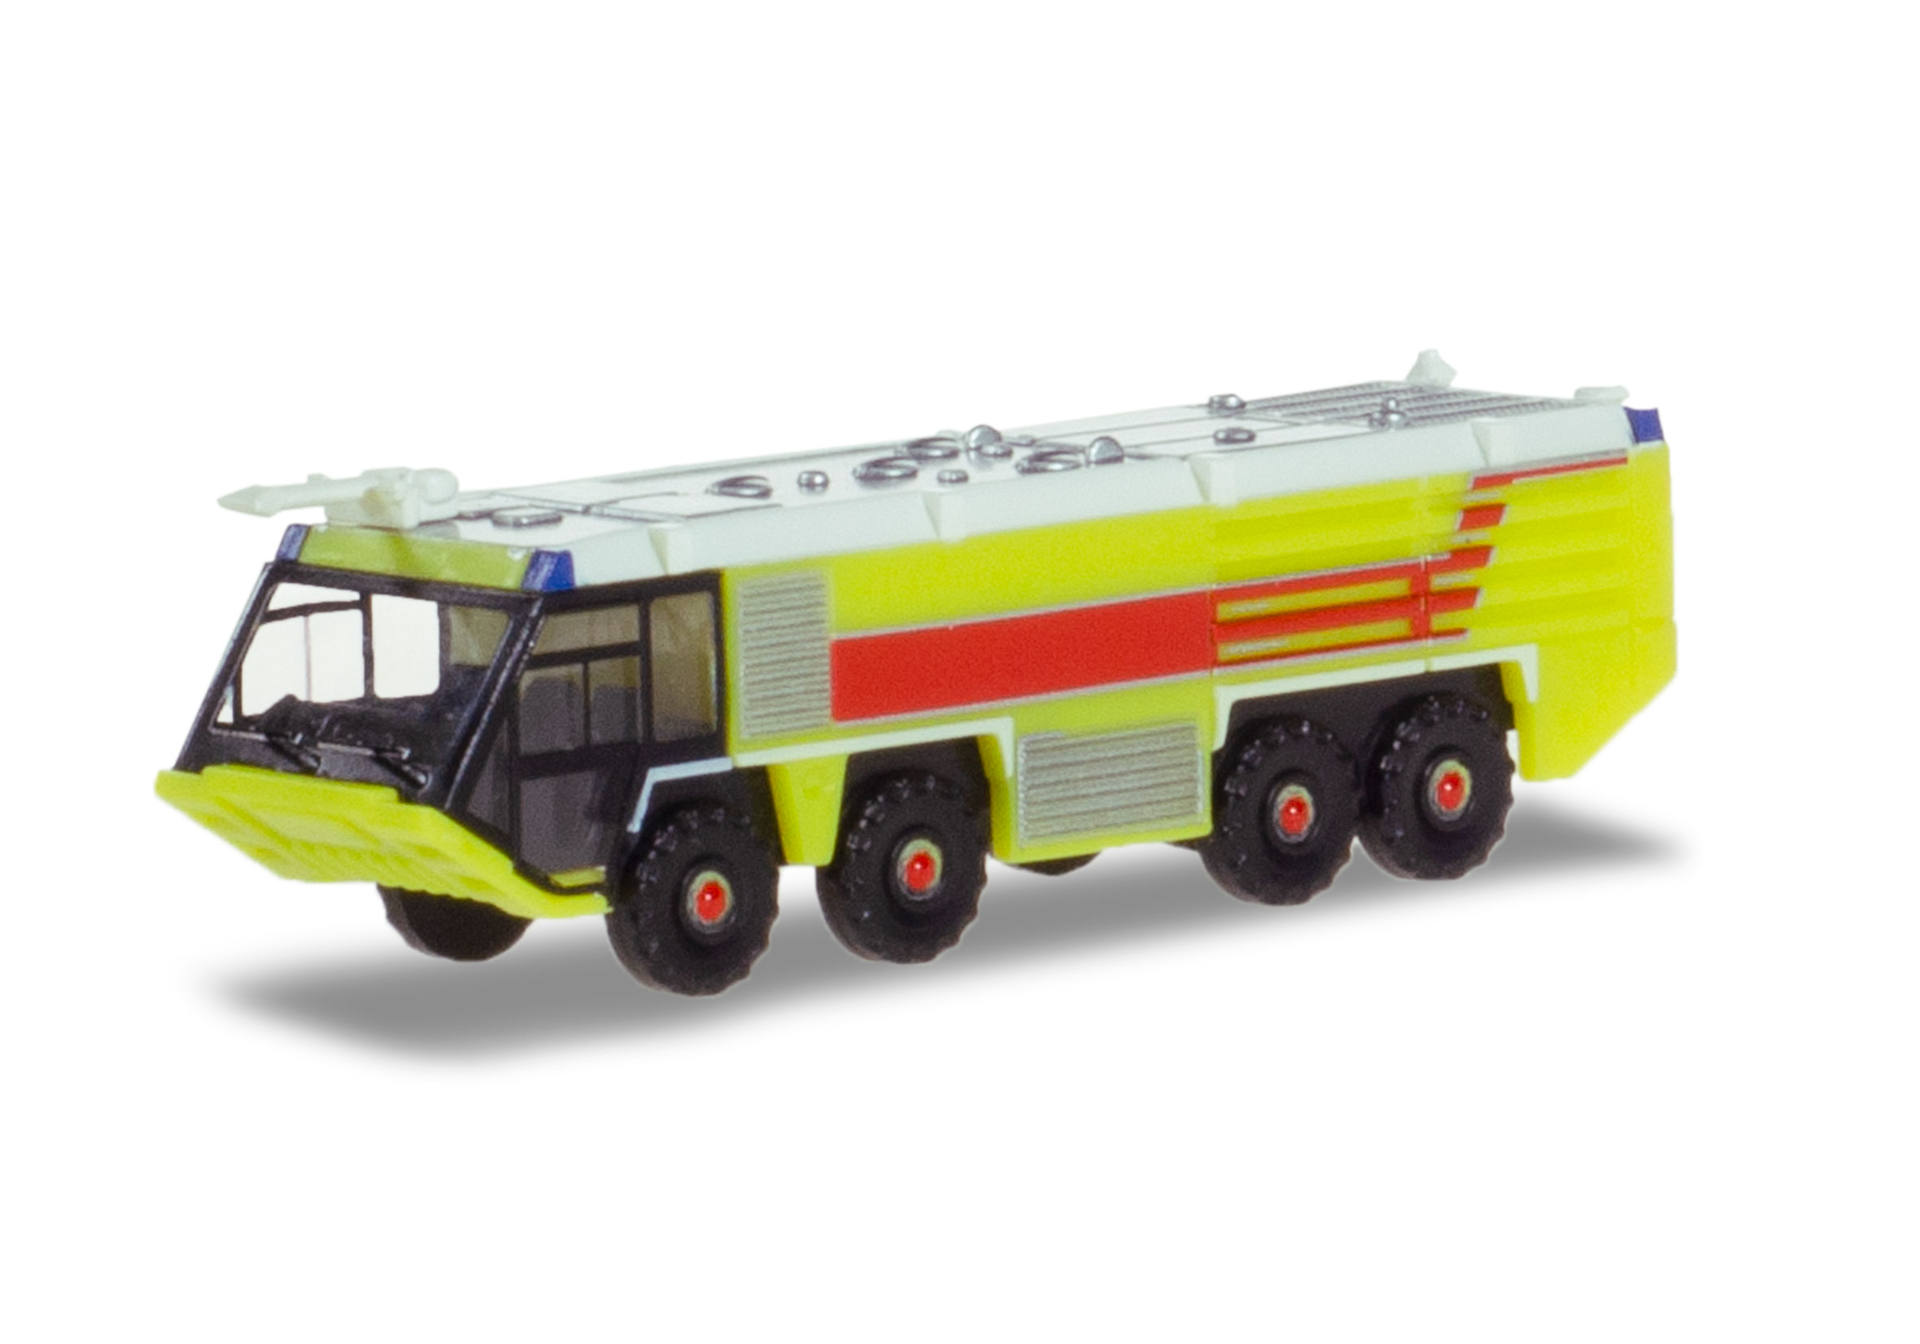 Airport Fire Engine – Lime green